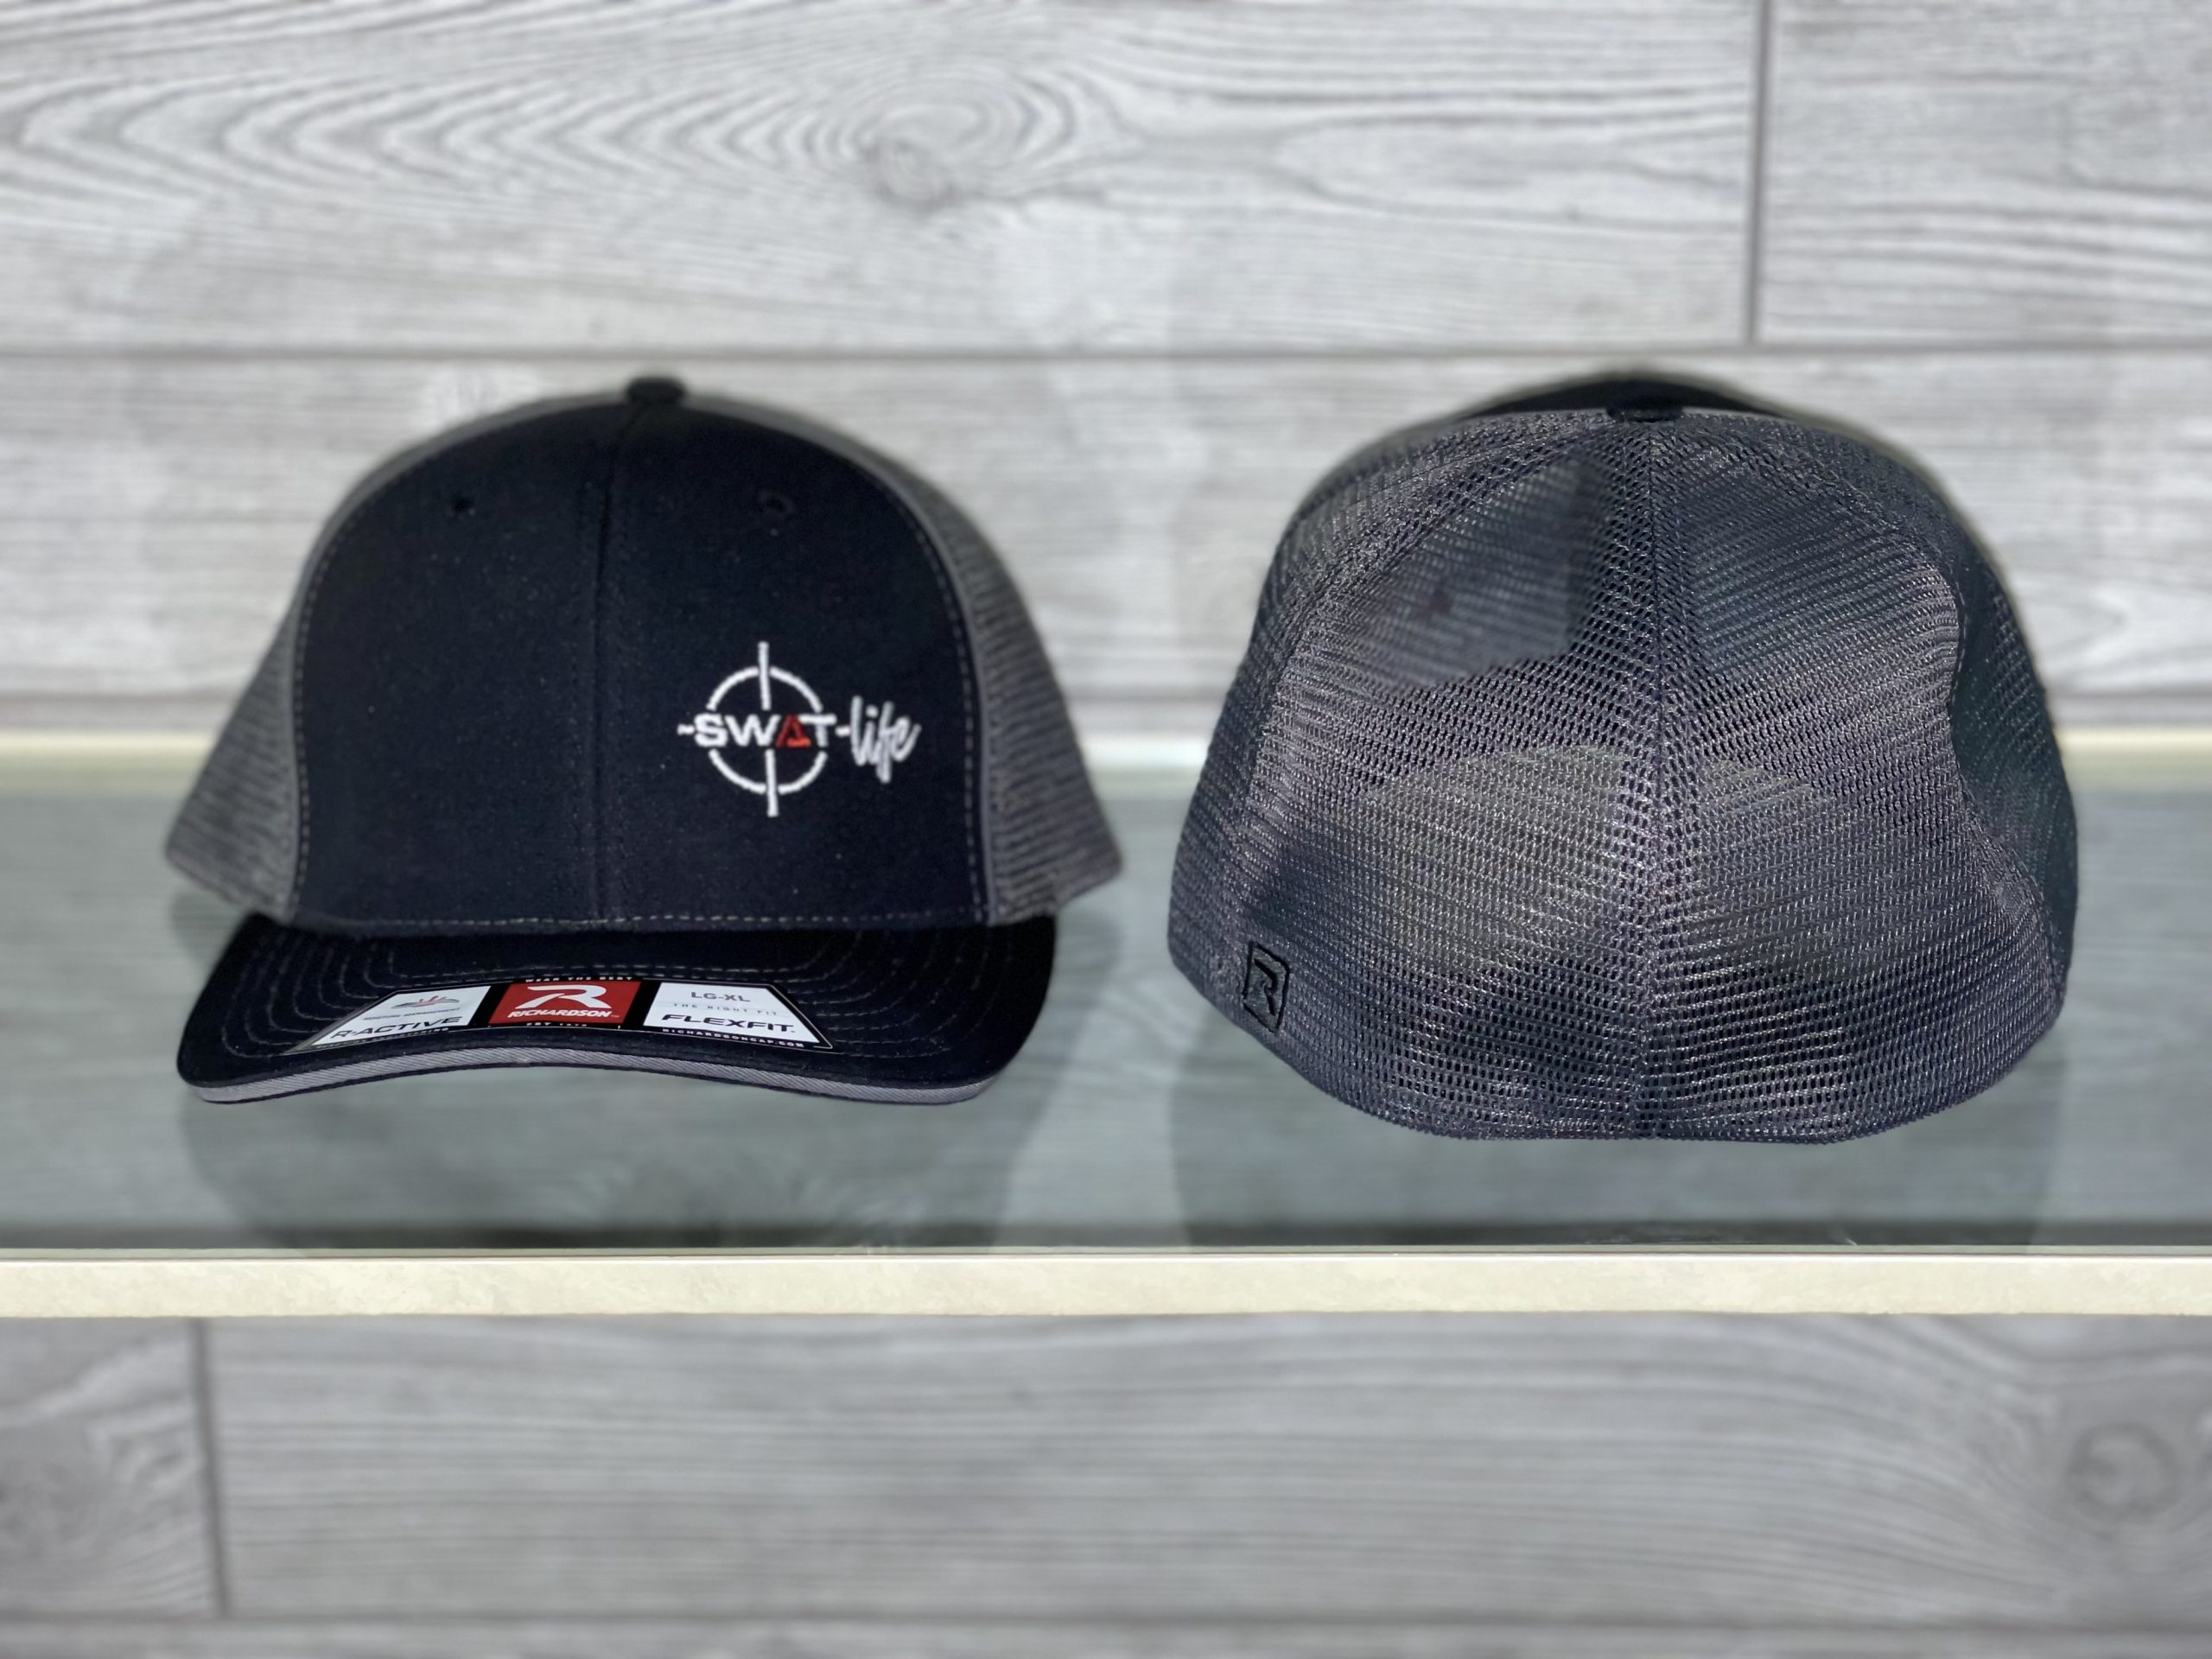 Richardson Black/Charcoal Swat Life Brand | Cap Flexfit Fitted in Mesh